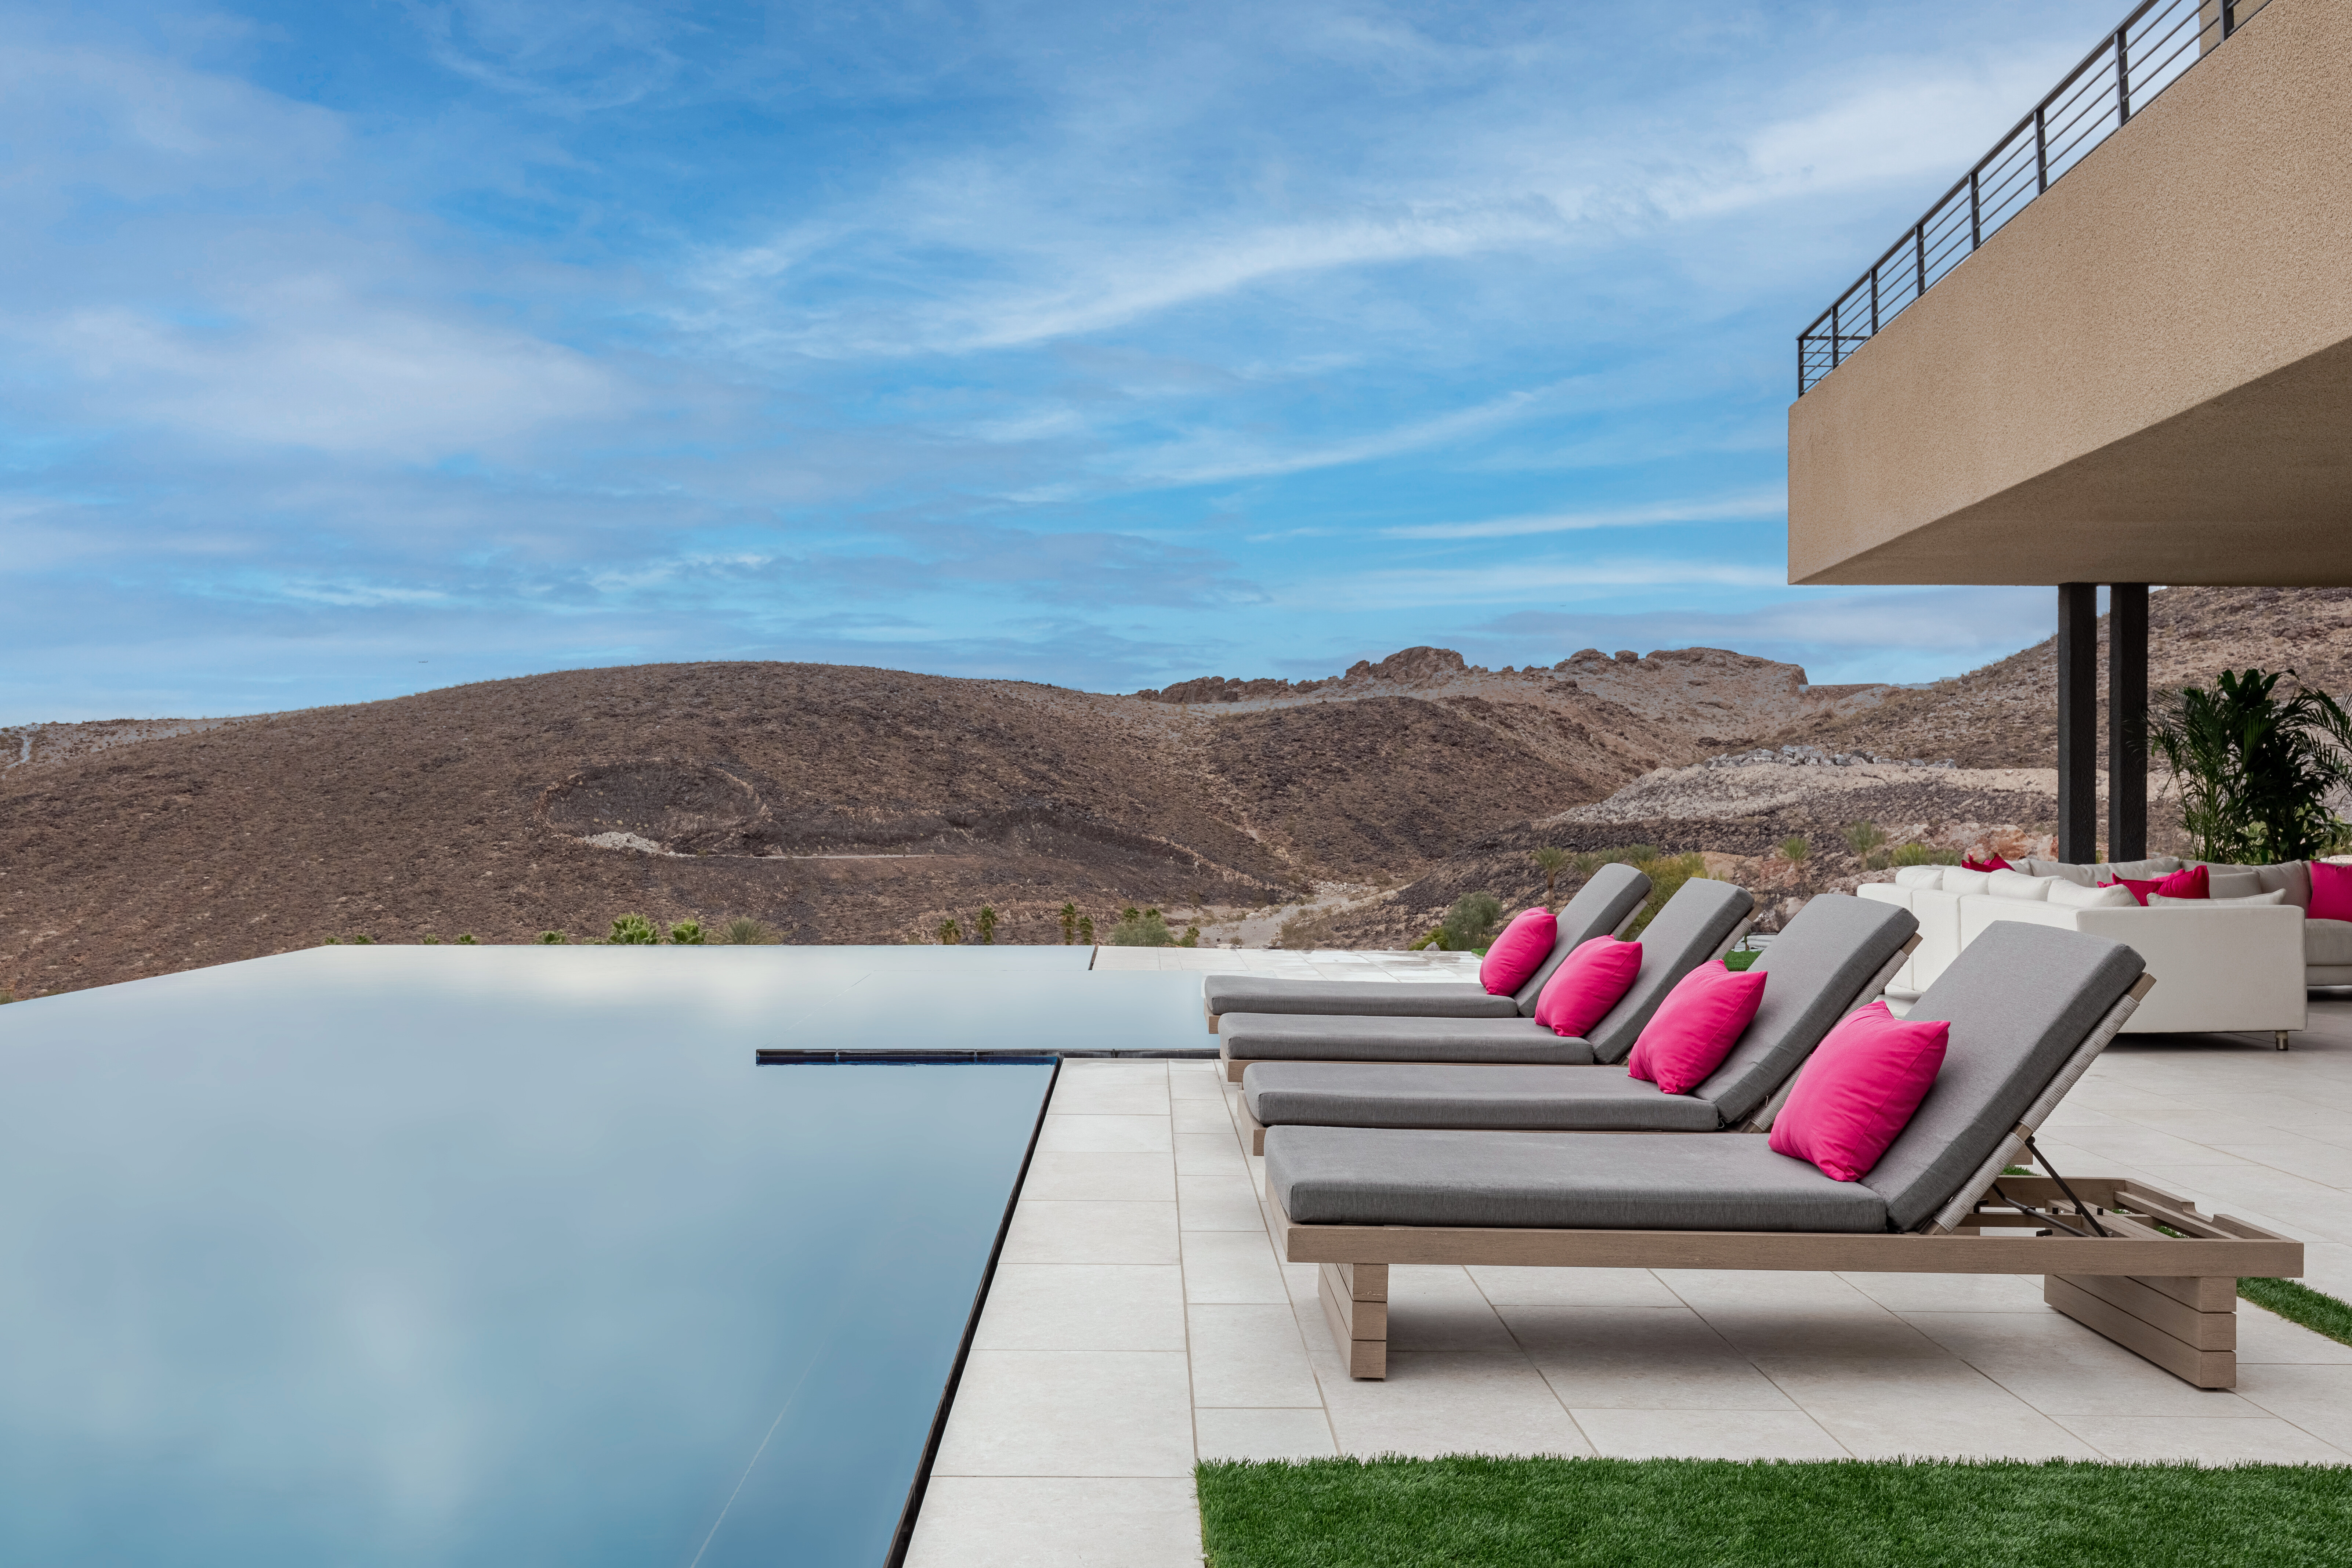 Outdoor pool featuring lounge chairs and couches with pink pillows looking out to the Las Vegas desert.